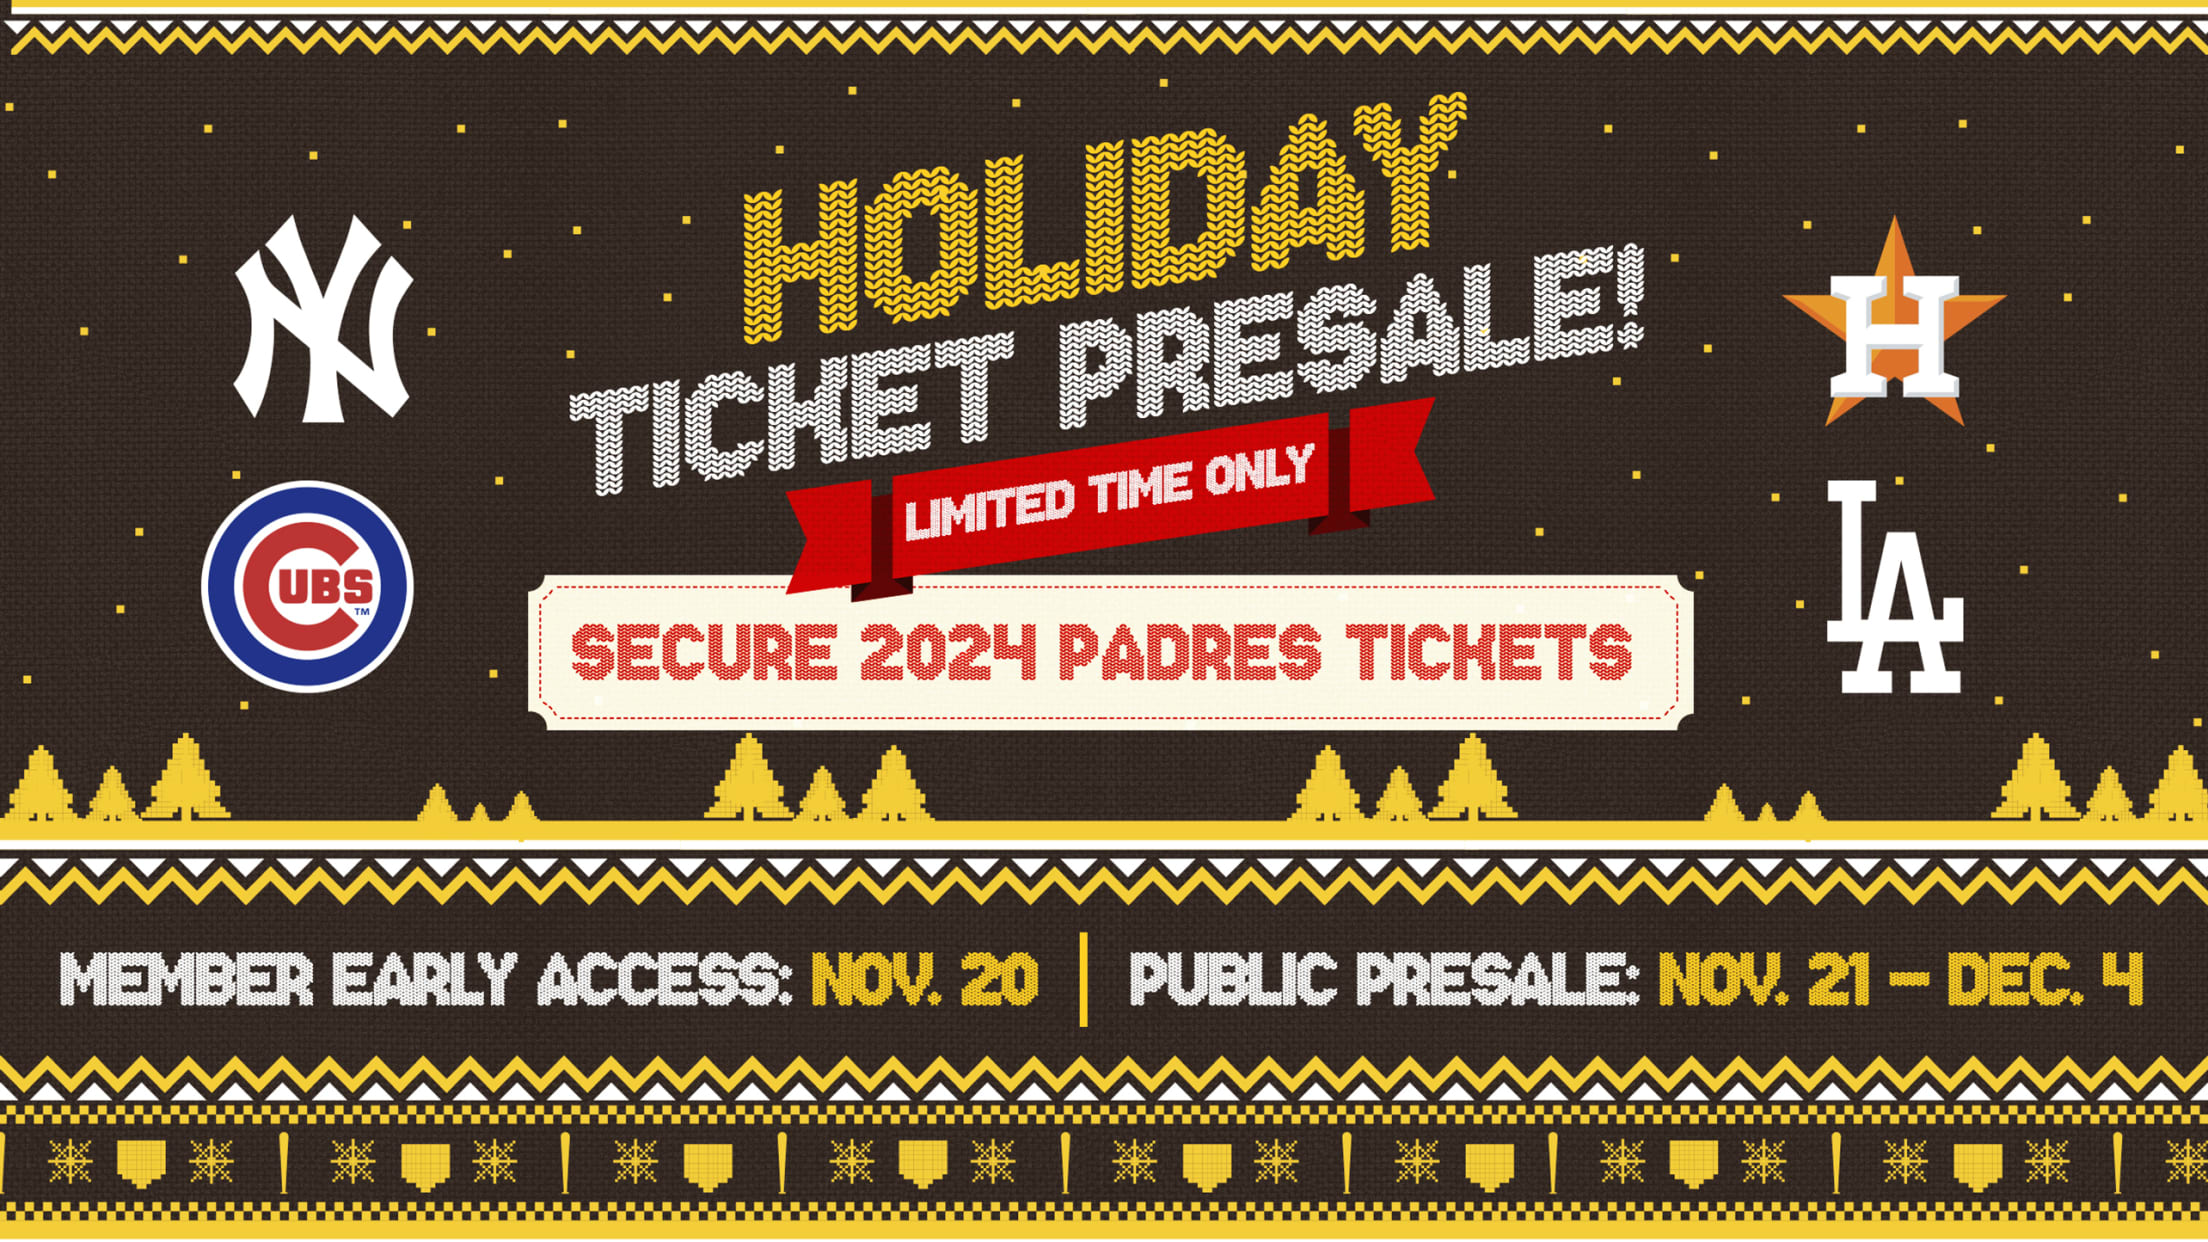 Holiday Ticket Offer San Diego Padres